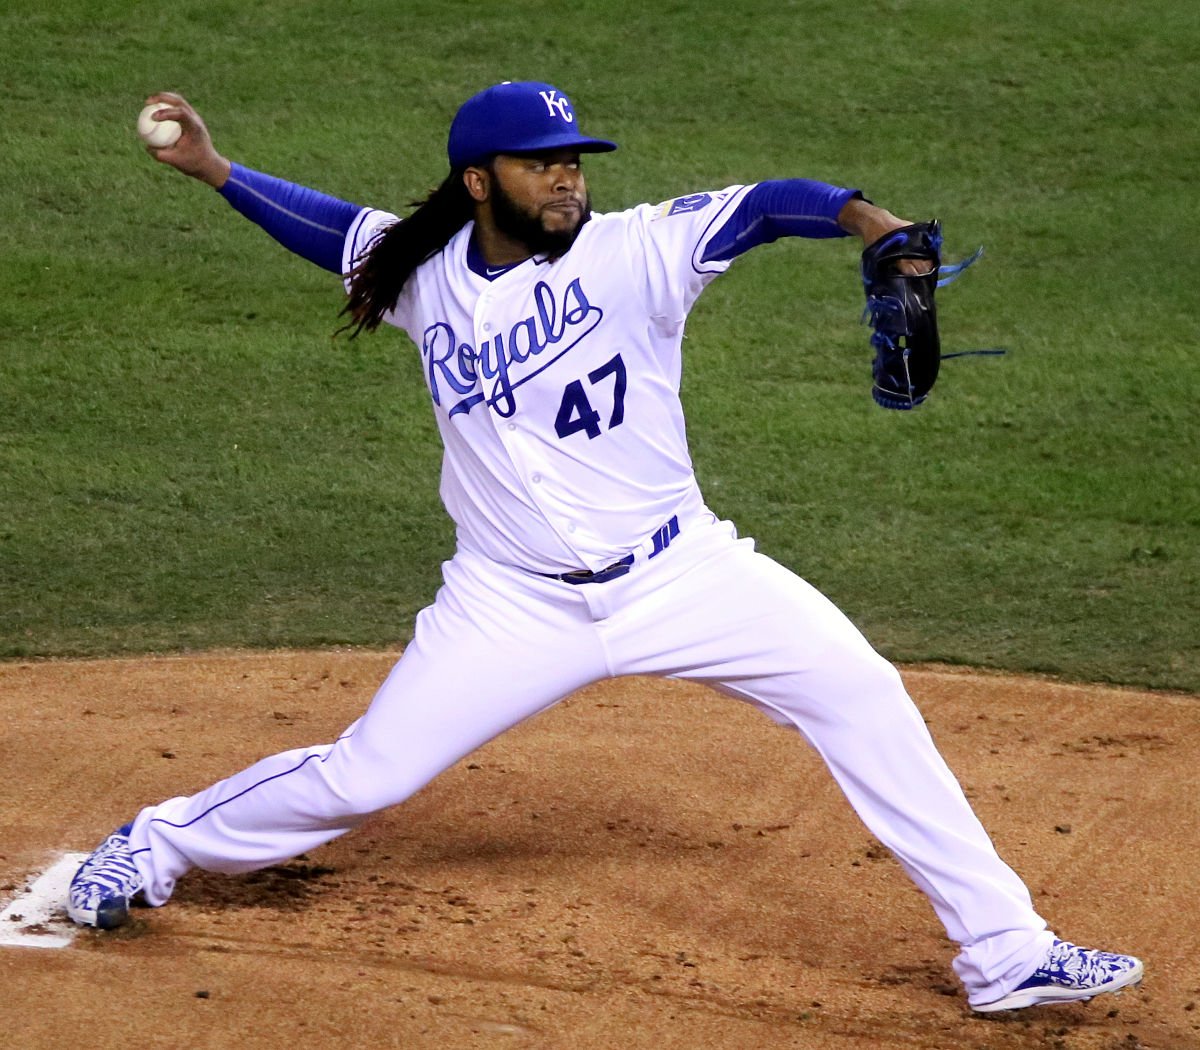 Happy Birthday to former Kansas City Royals player Johnny Cueto(2015), who turns 32 today! 